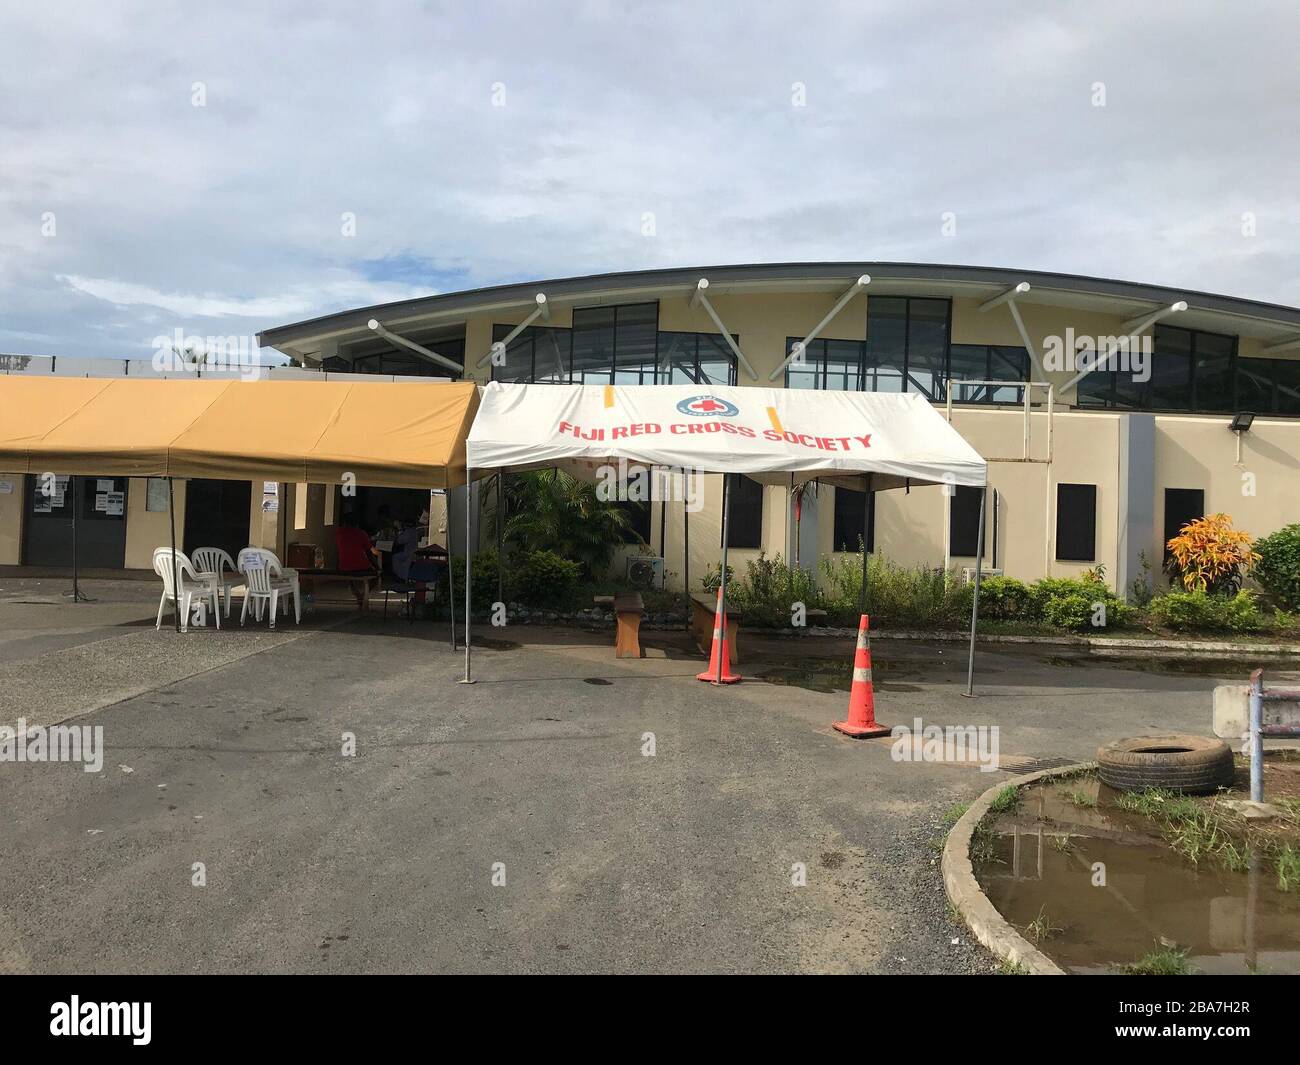 (200326) -- SUVA, March 26, 2020 (Xinhua) -- Photo taken on March 23, 2020 shows the Nadi Hospital where COVID-19 patients are treated in Suva, Fiji. As a 31-year-old Fijian woman tested positive, the infections in Fiji have reached five. Starting from Thursday, the main international airport of Fiji, the Nadi International airport will be officially shut down to all scheduled passenger travel while passenger travel to the outer islands will cease from Sunday. (FIJI SUN/Handout via Xinhua) Stock Photo